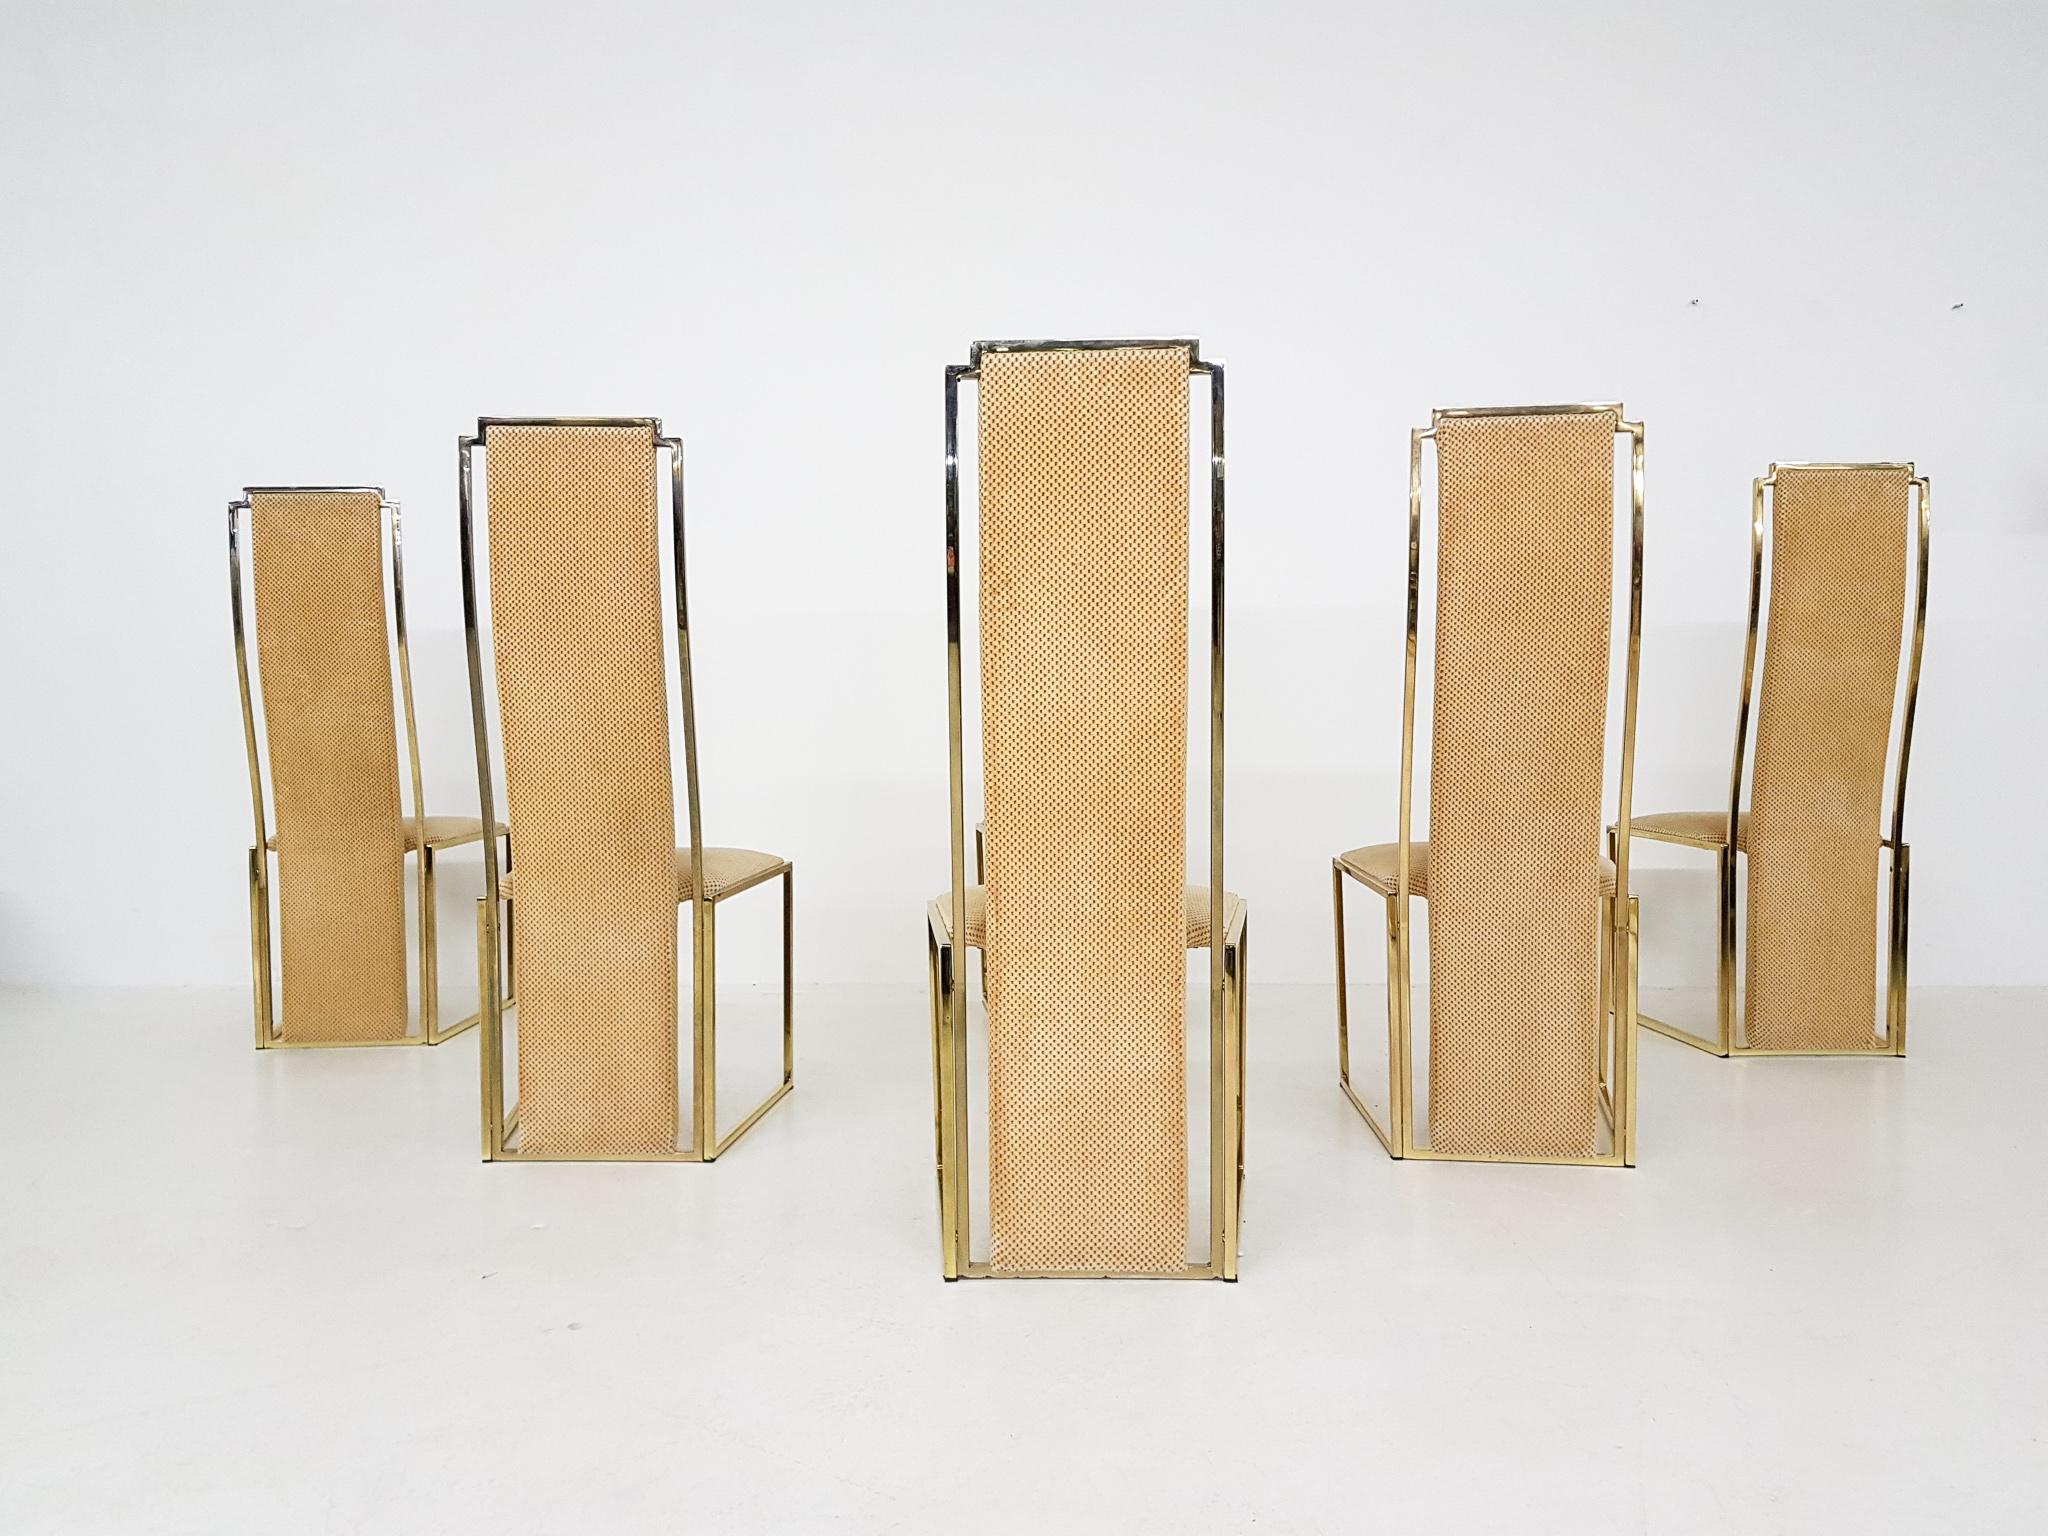 Metal Alain Delon Travertine, Brass and Gold Dining Set, France, 1980s For Sale